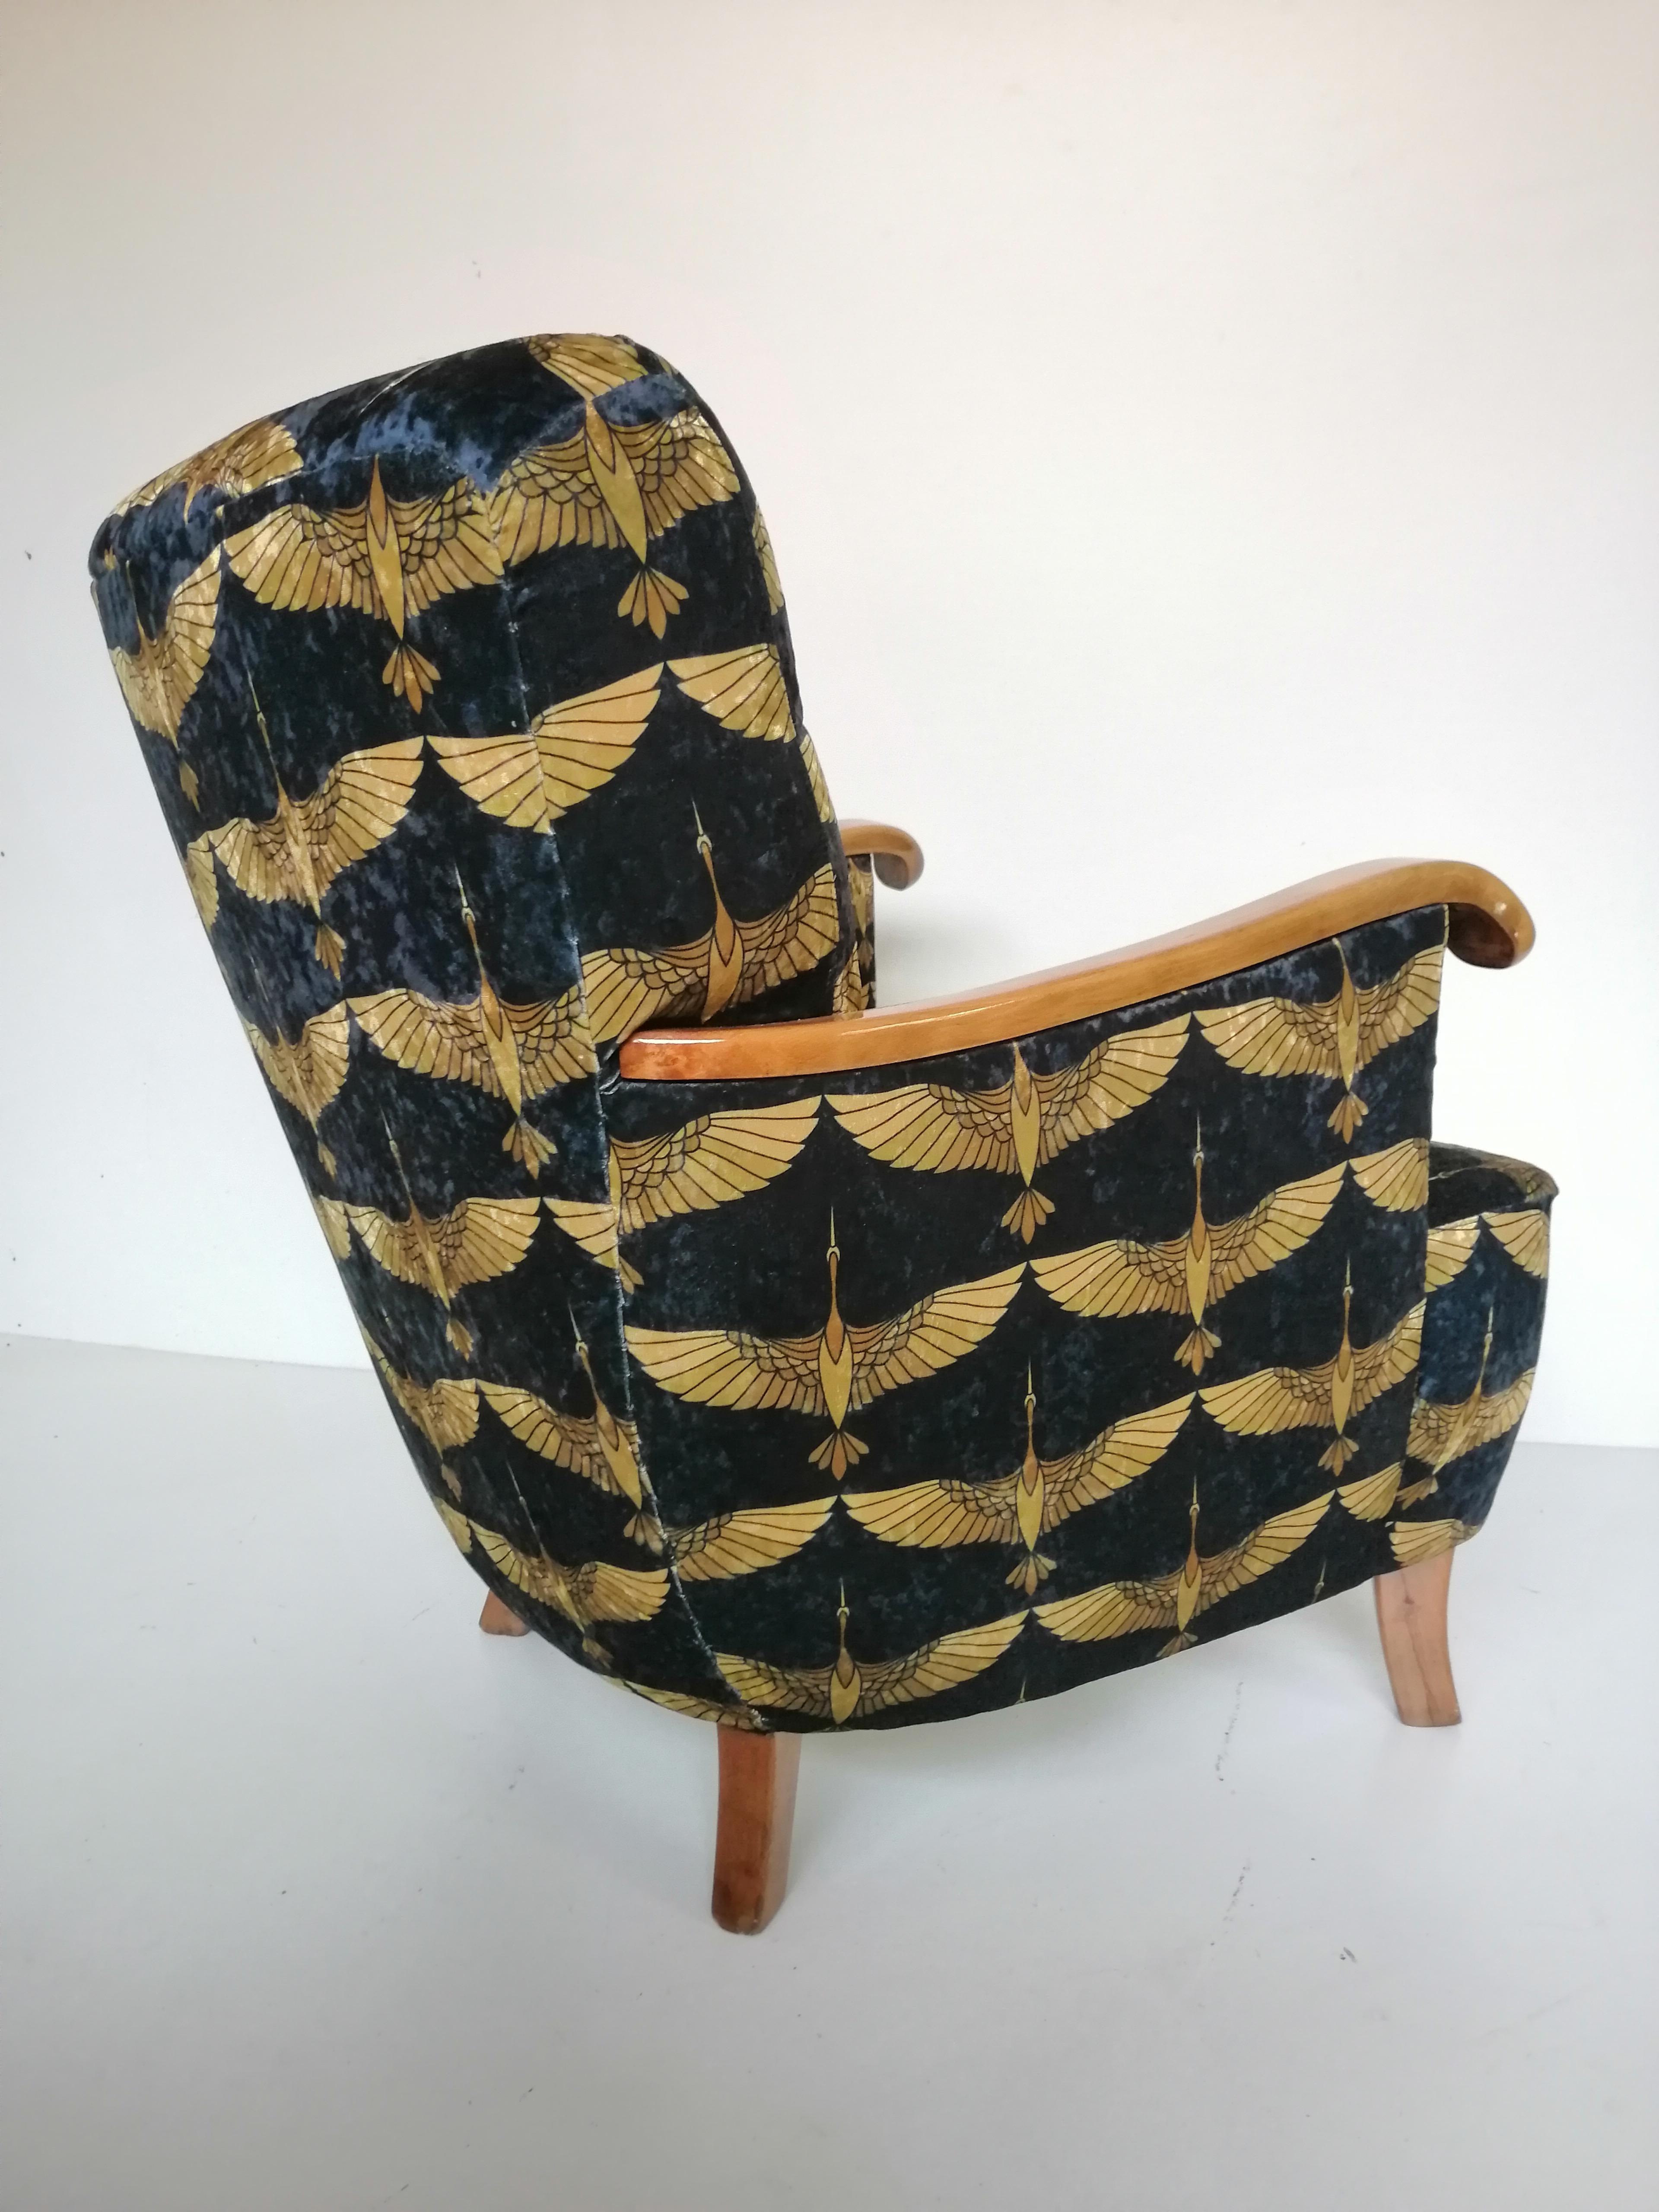 Art Deco armchair from 1930 Czech Republic.

Every piece of furniture that leaves our workshop from the beginning to the end is subjected to manual renovation, so as to restore its original condition from many years ago (It has been cleaned to